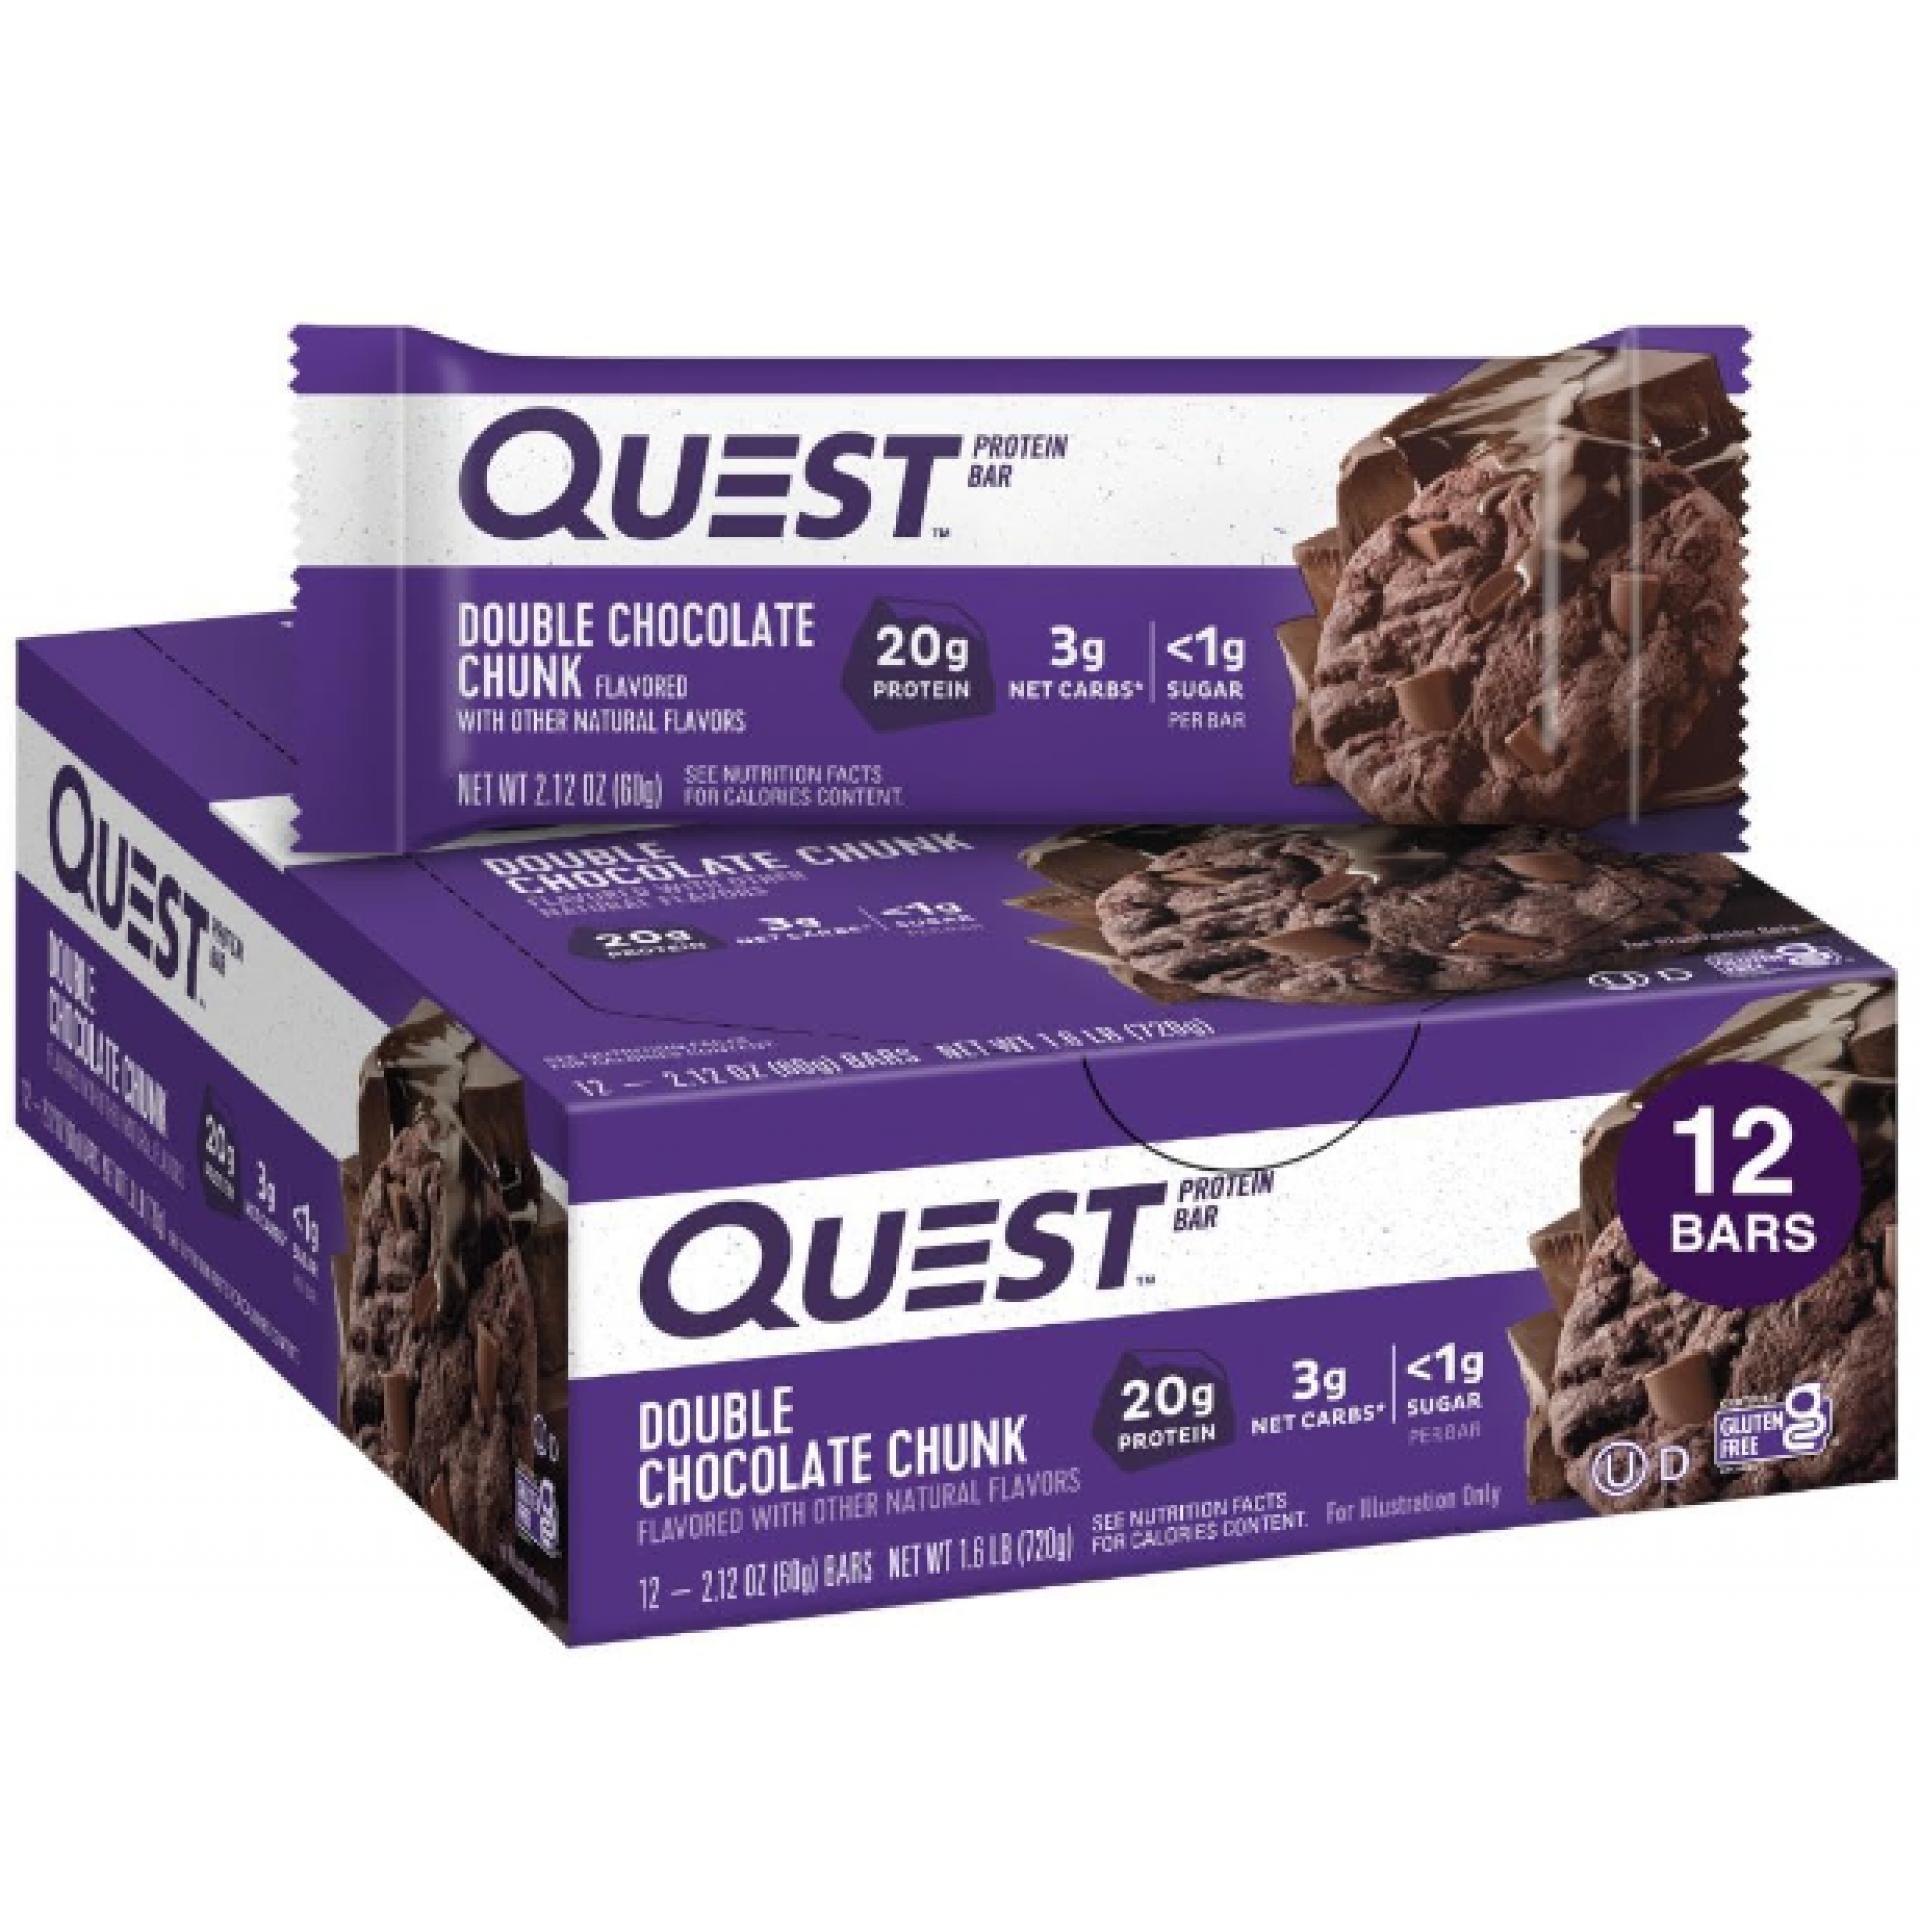 Quest Protein Bars - $3.99